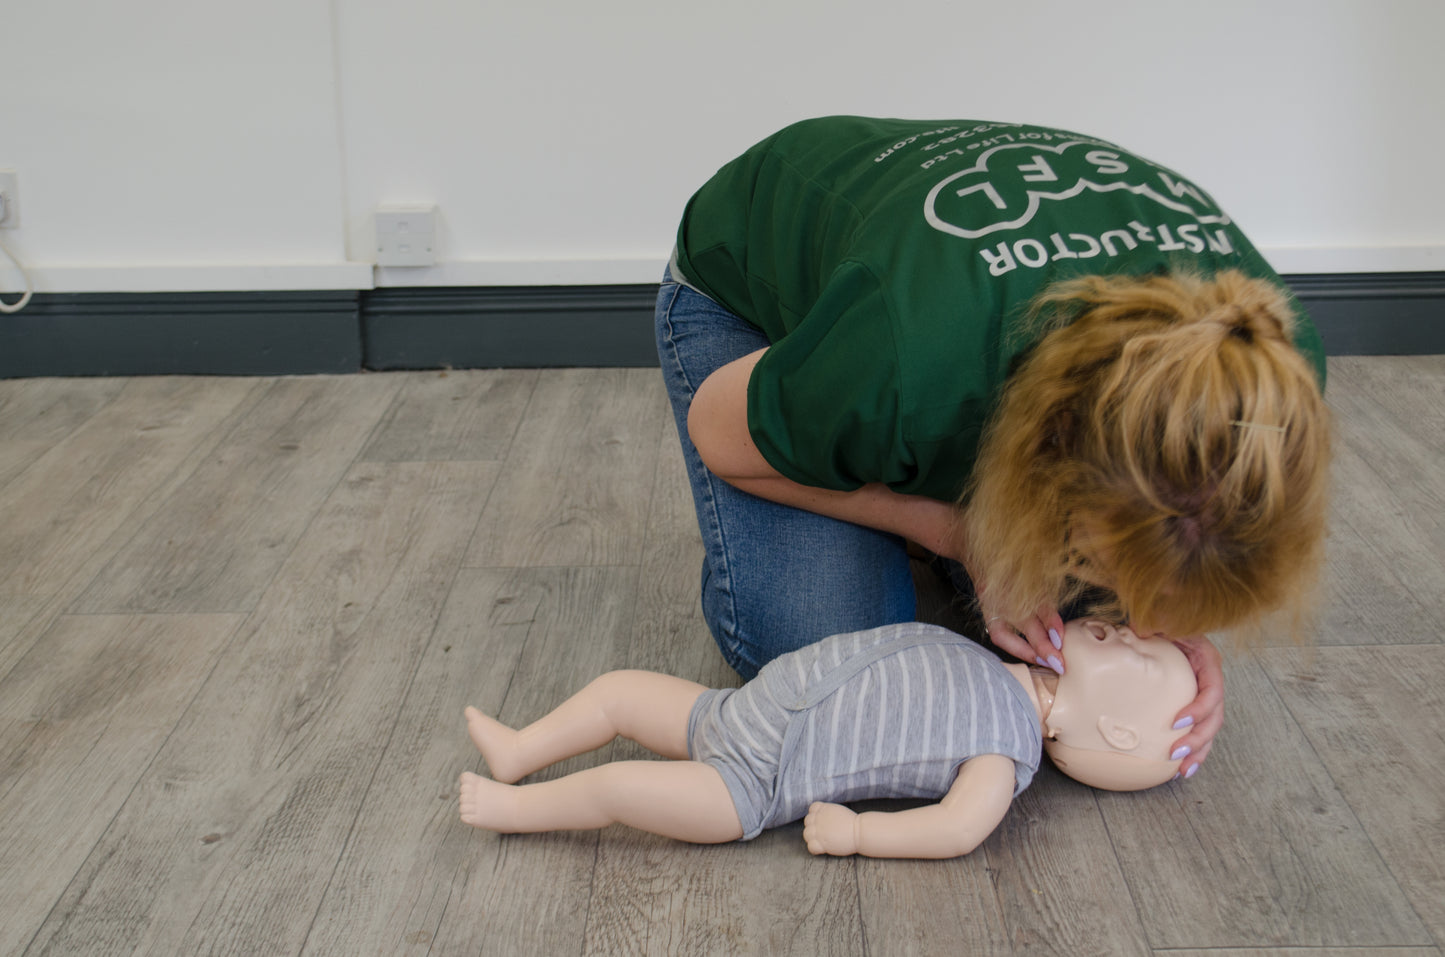 Paediatric Blended First Aid